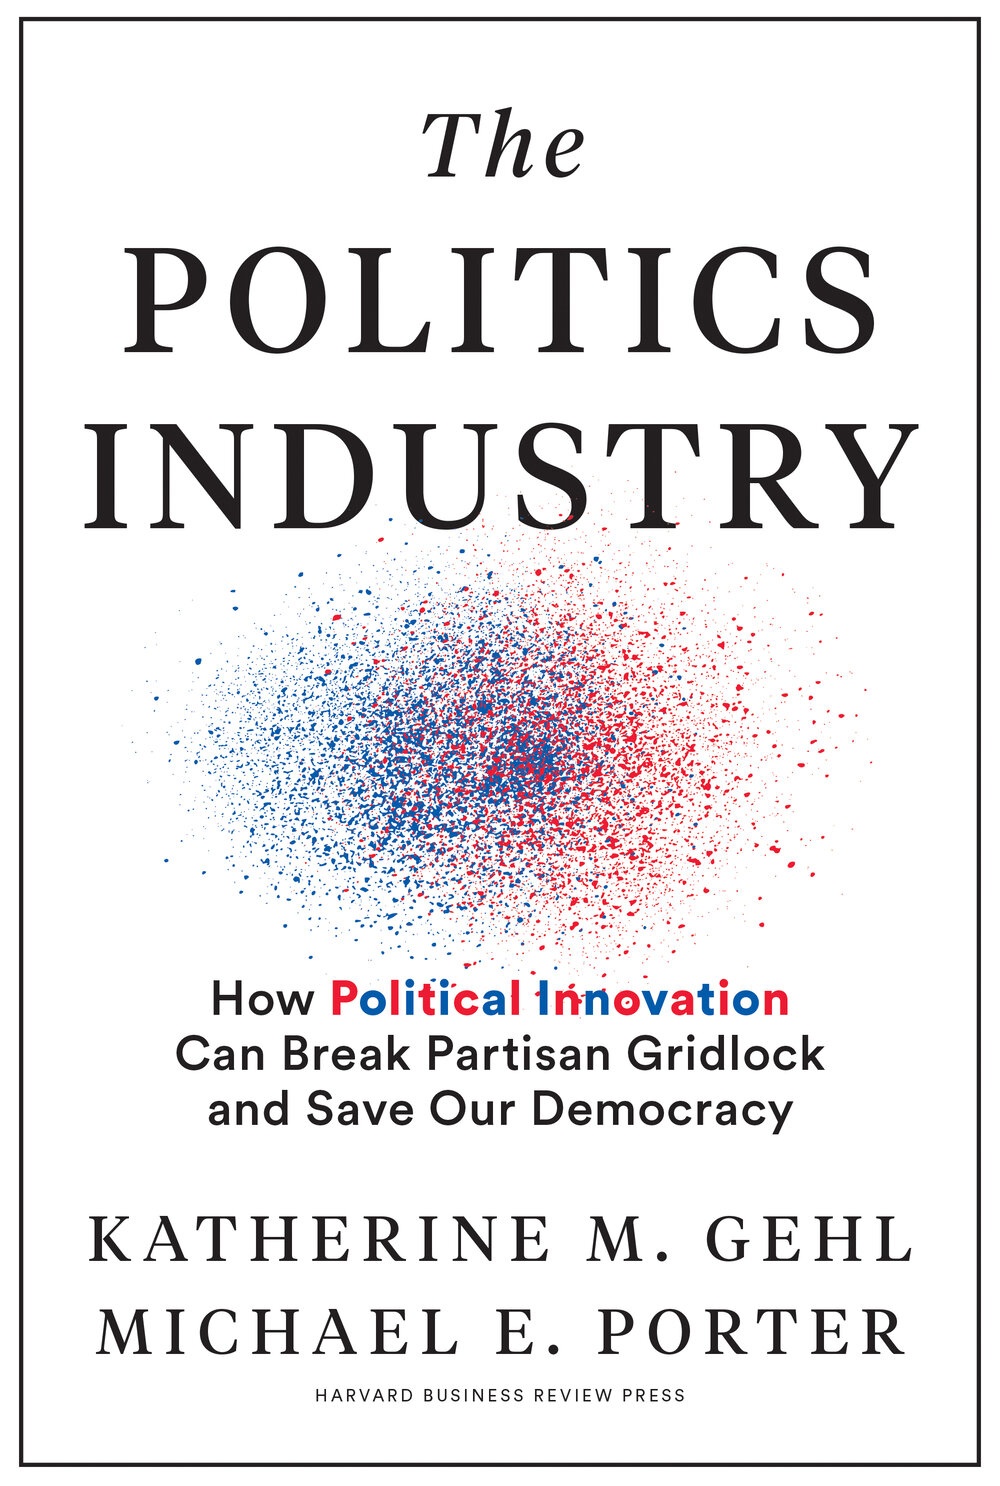 The Politics Industry: How Political Innovation Can Break Partisan Gridlock and Save Our Democracy by Katherine M. Gehl and Michael E. Porter